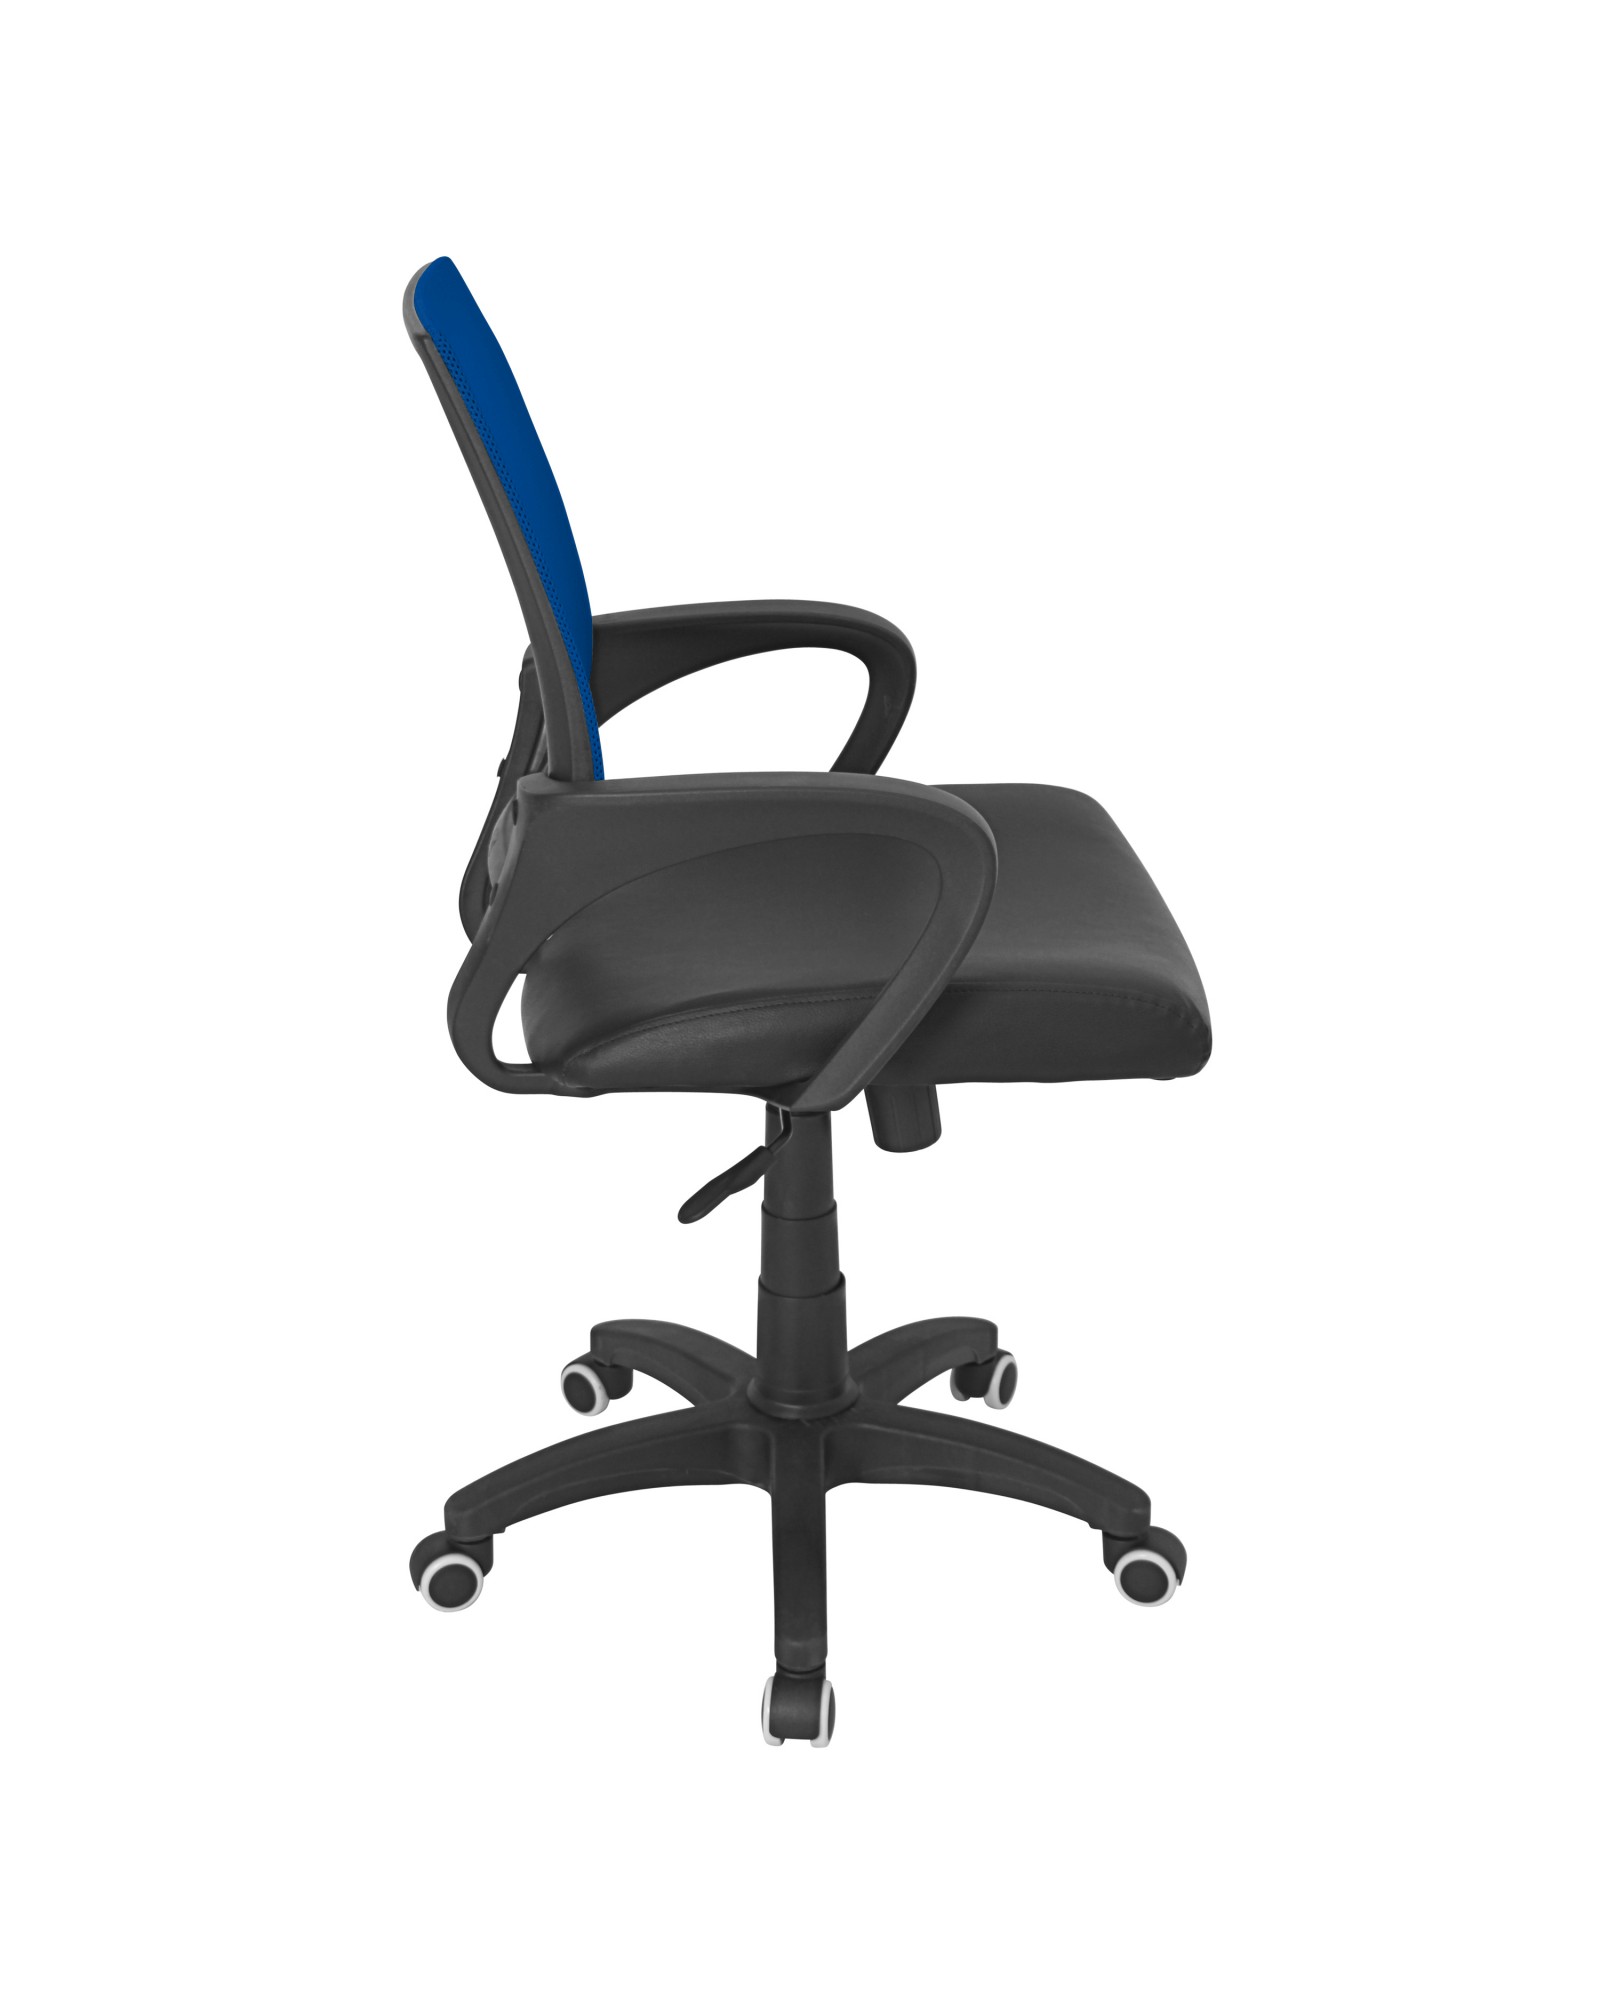 Officer Modern Adjustable Office Chair with Swivel in Blue